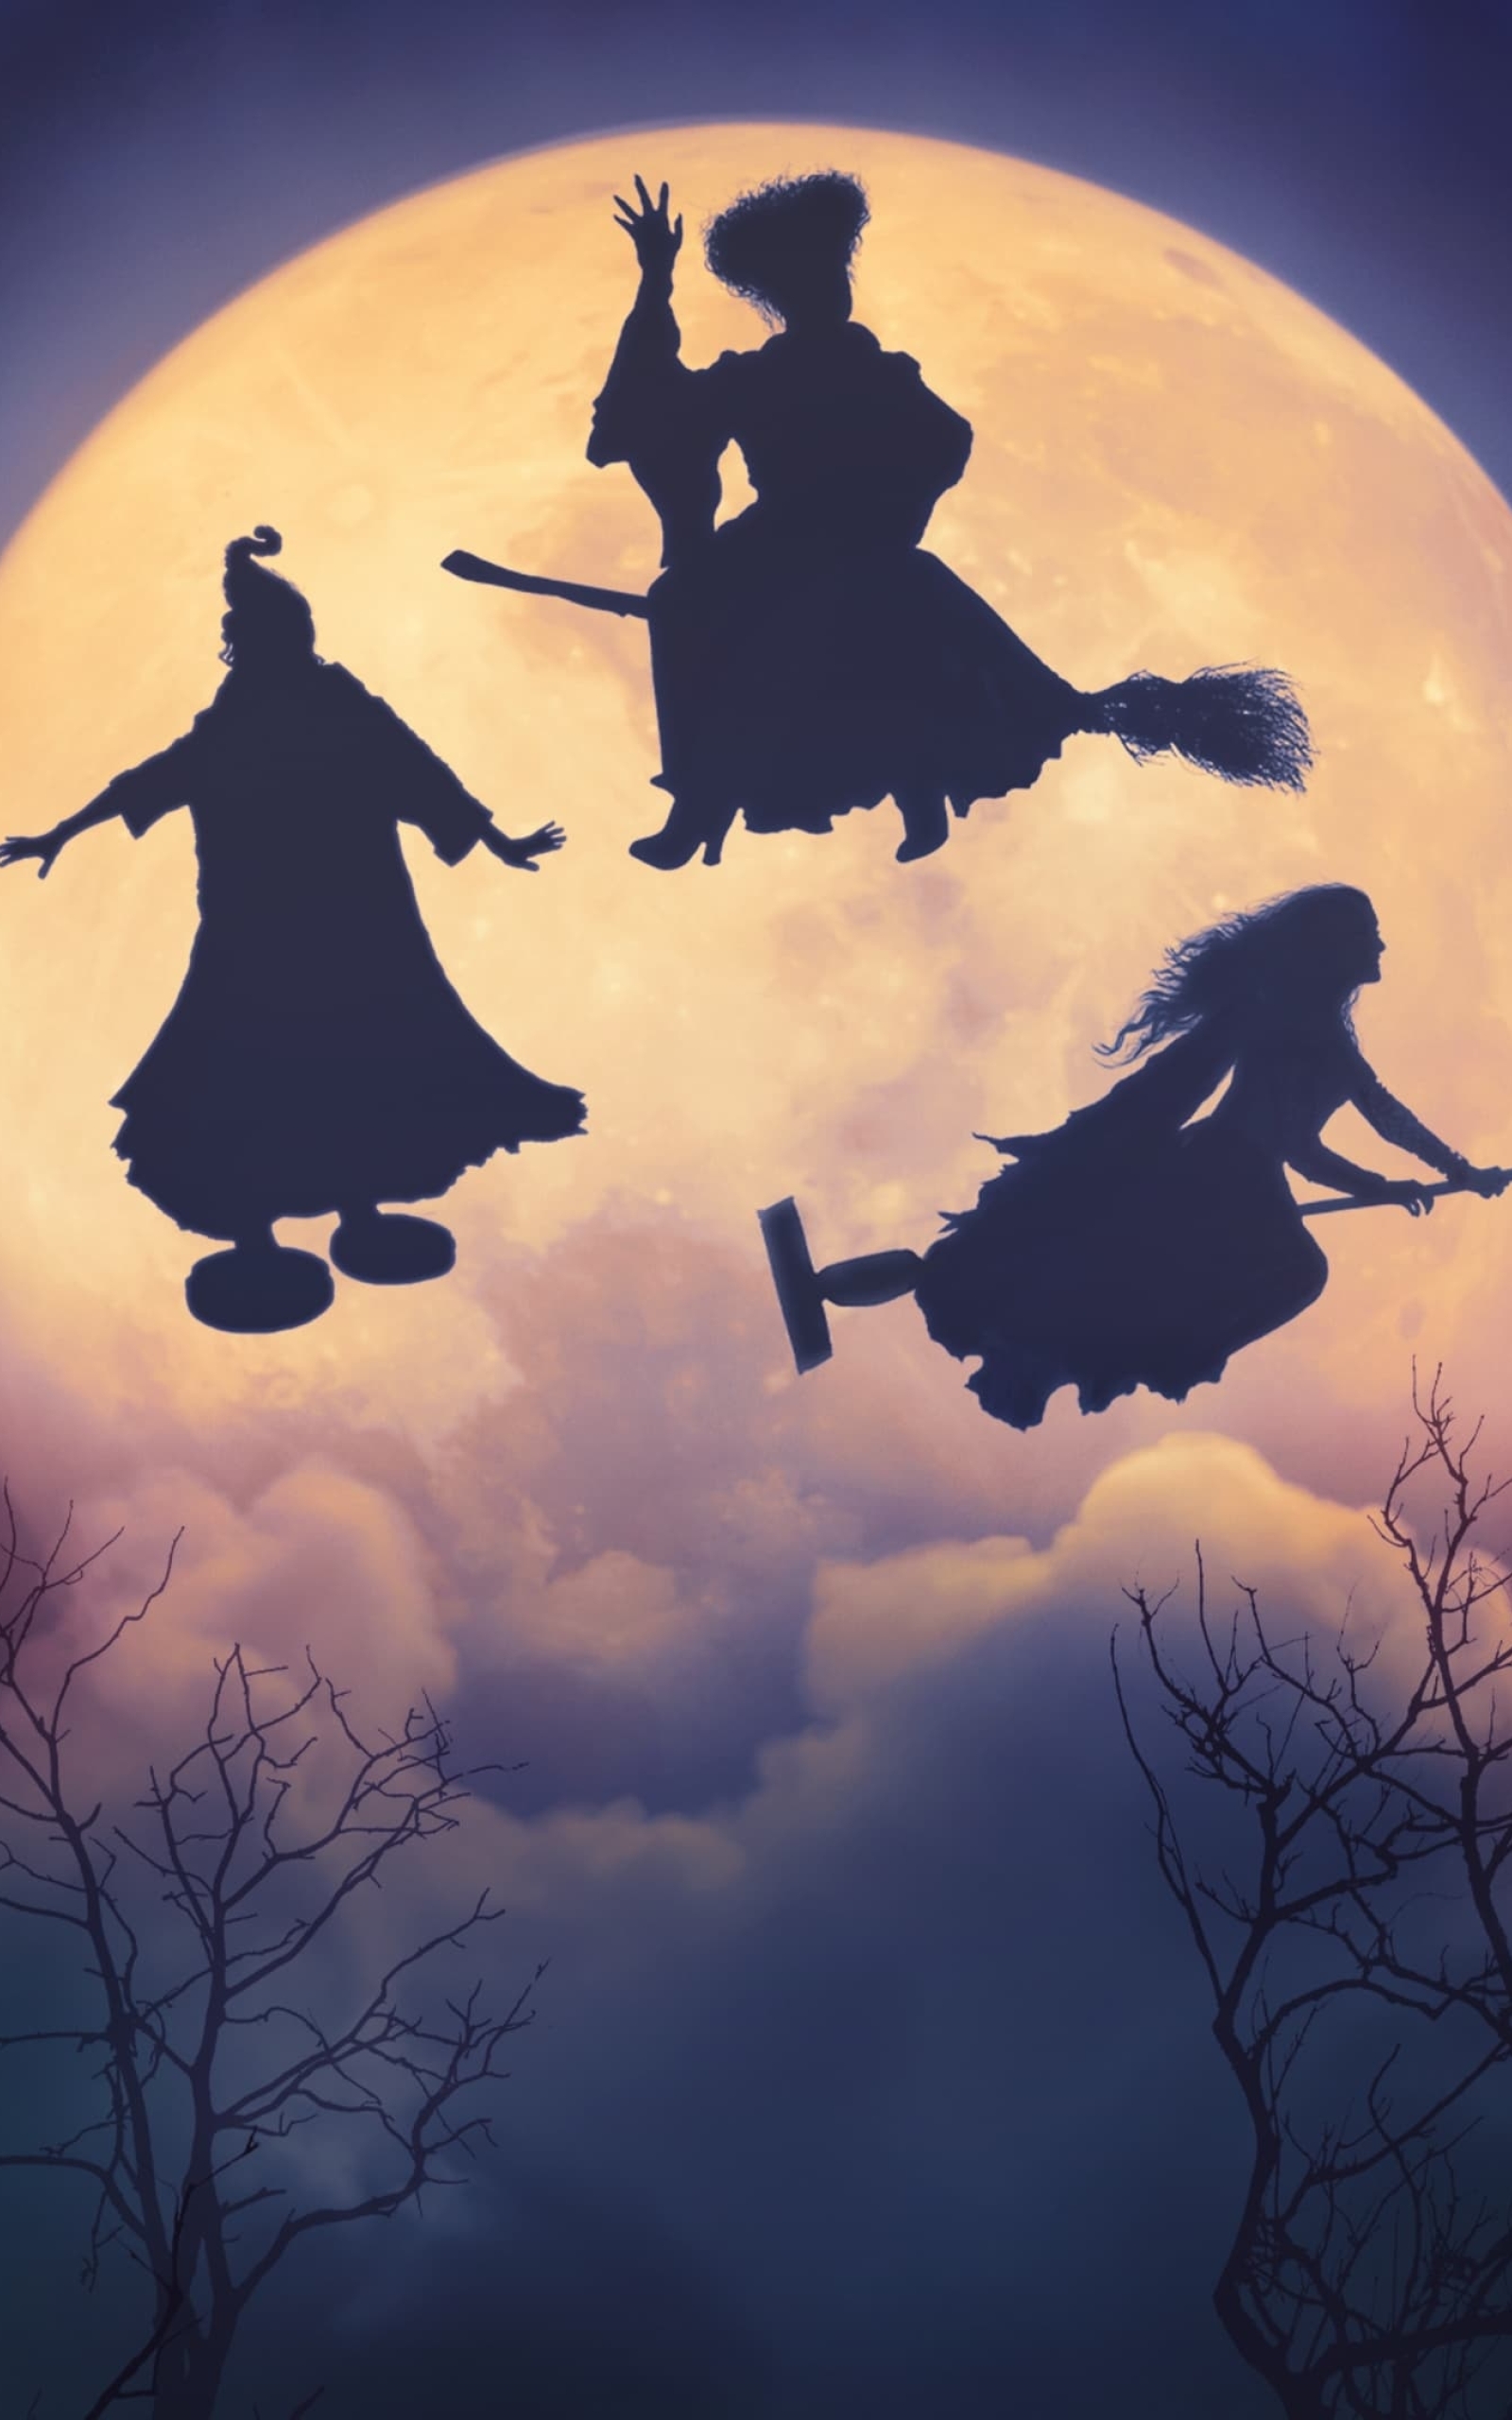 21 Hocus Pocus Zoom Backgrounds To Bewitch Your Calls